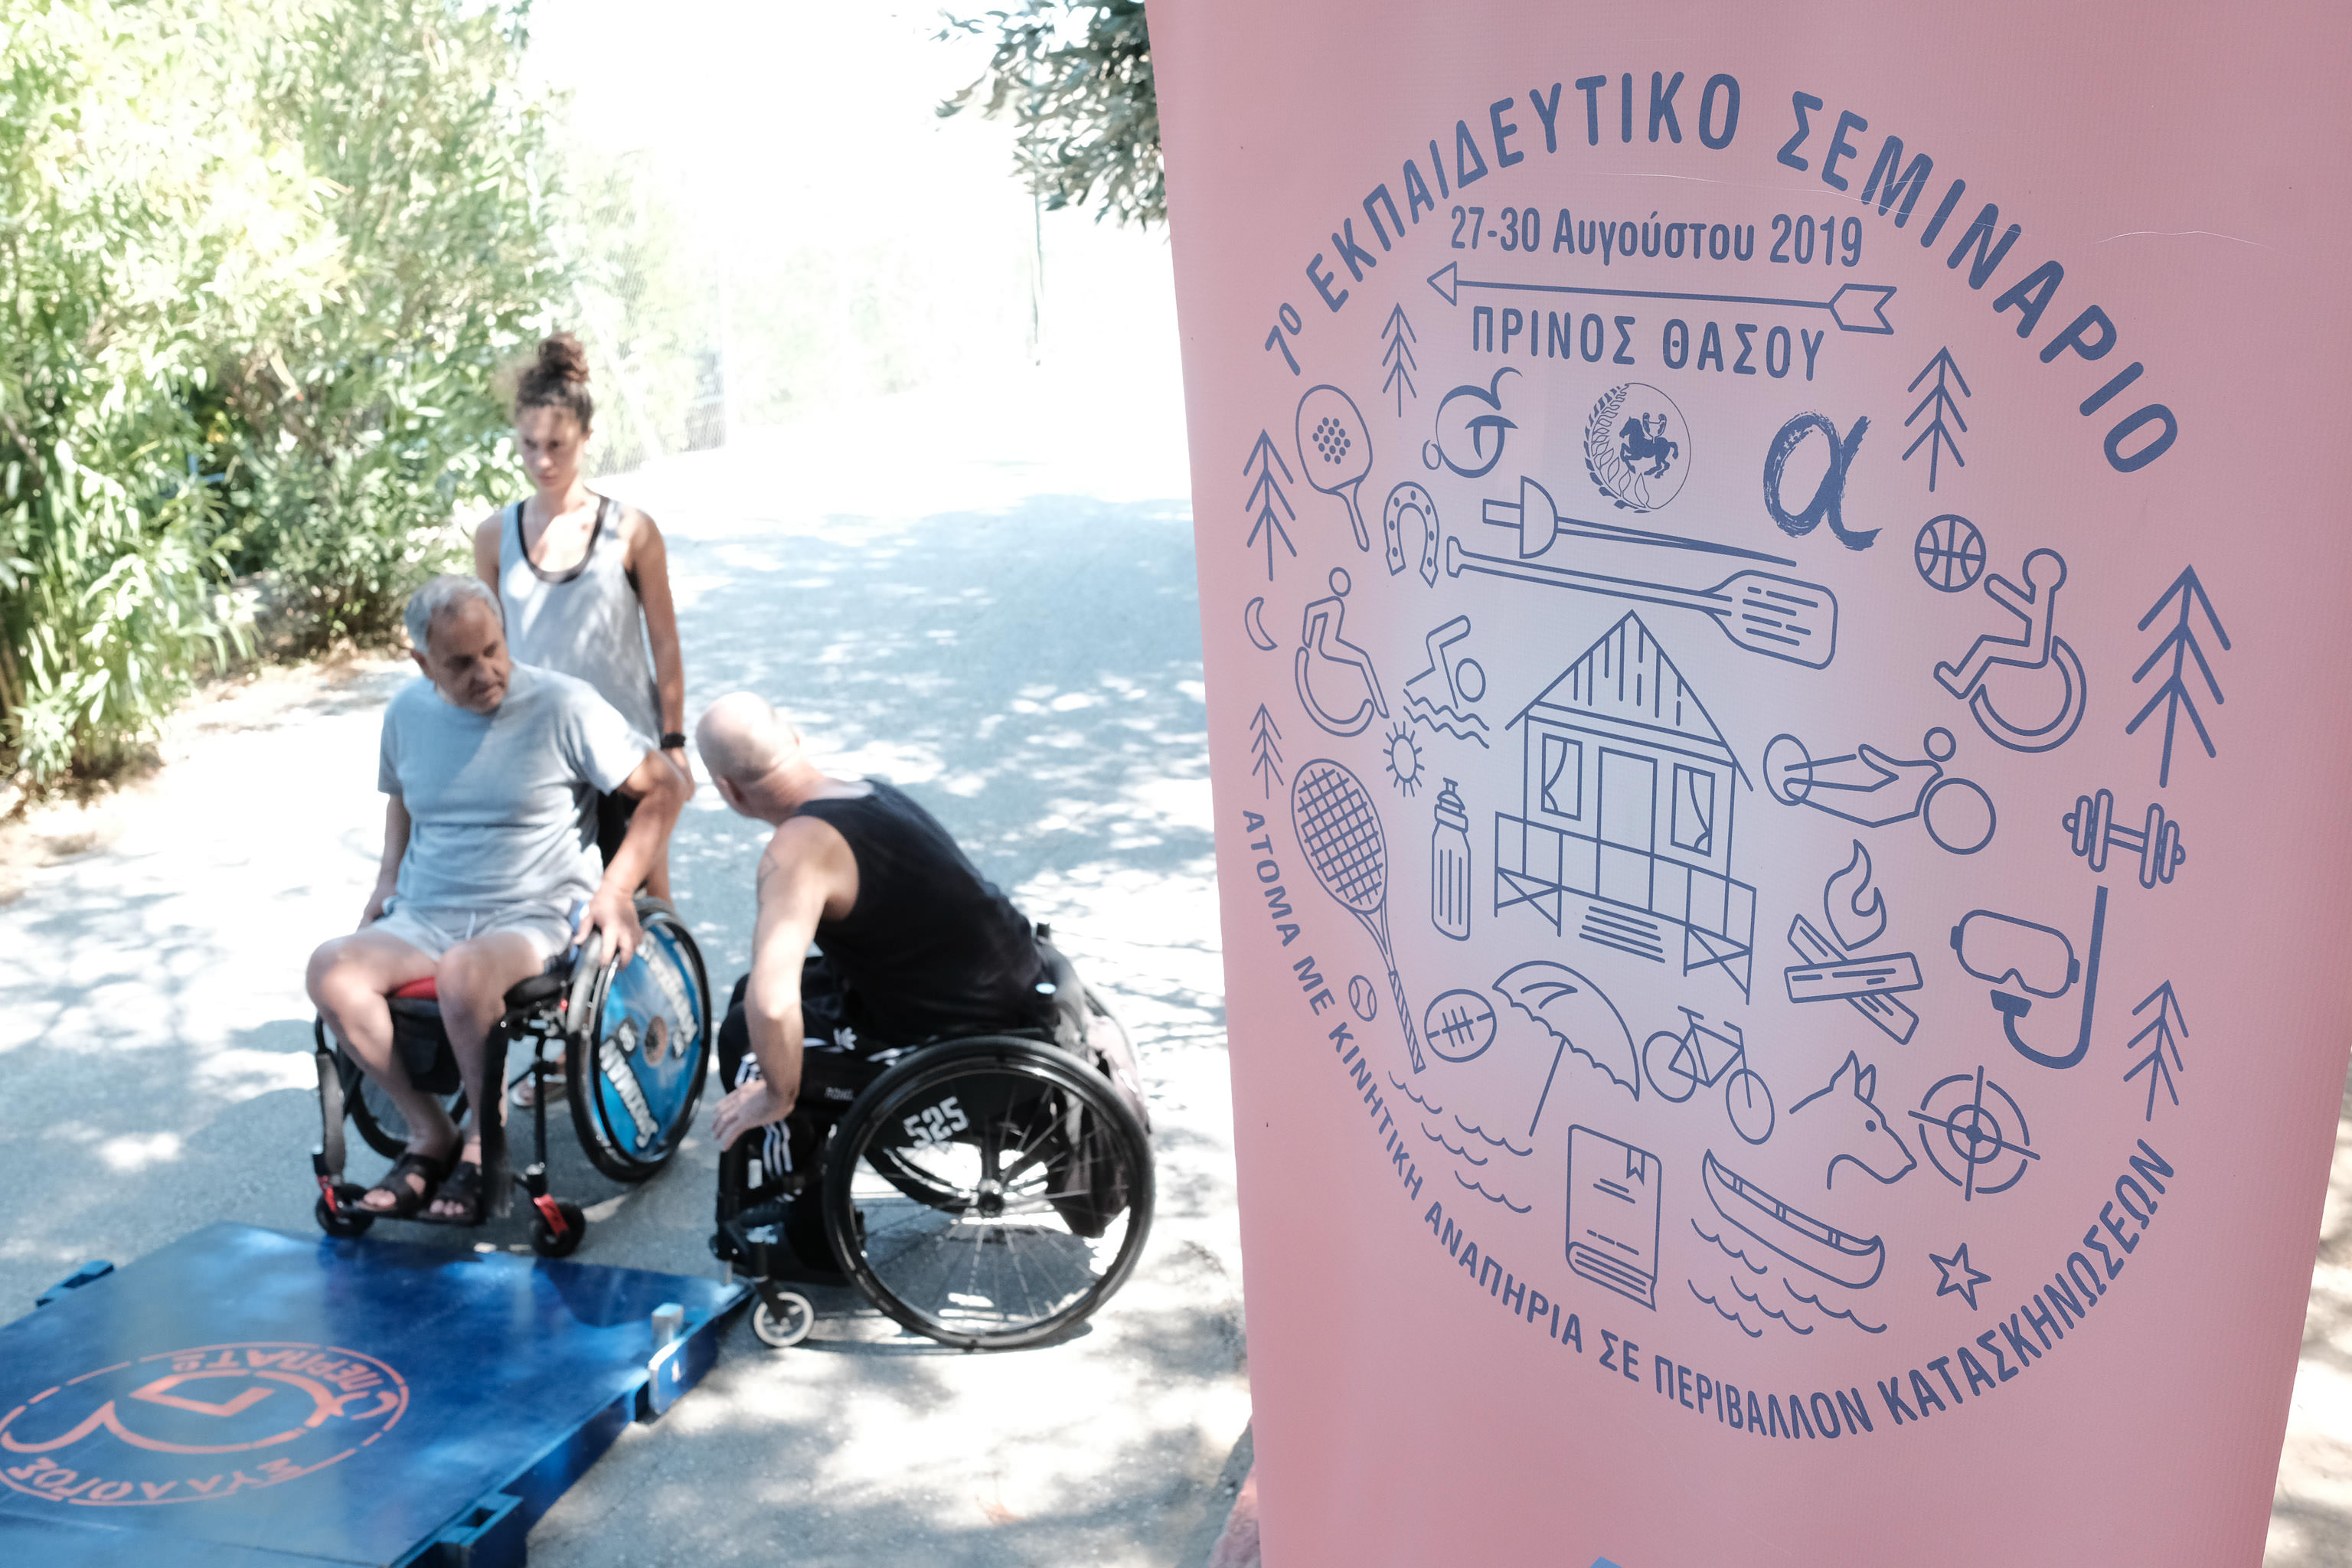 Cover. On the left, two male wheelchair users and a non-disabled female talking. On the right, a banner with a logo of multiple drawings of outdoor activities and a title: 7th training camp for disabled people with mobility impairments. August 2019